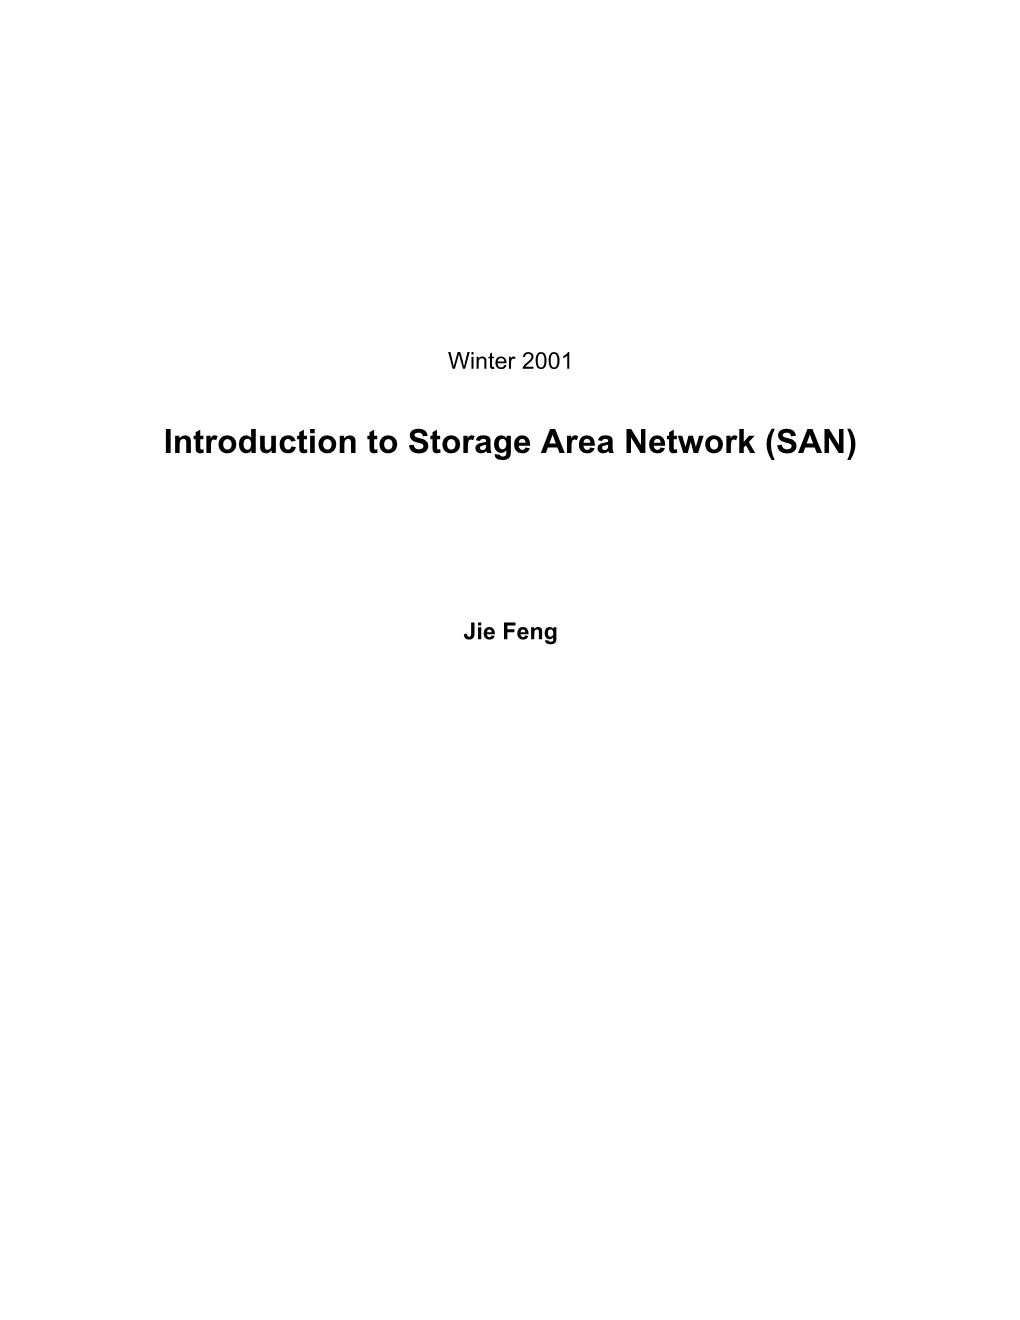 Introduction to Storage Area Network (SAN)